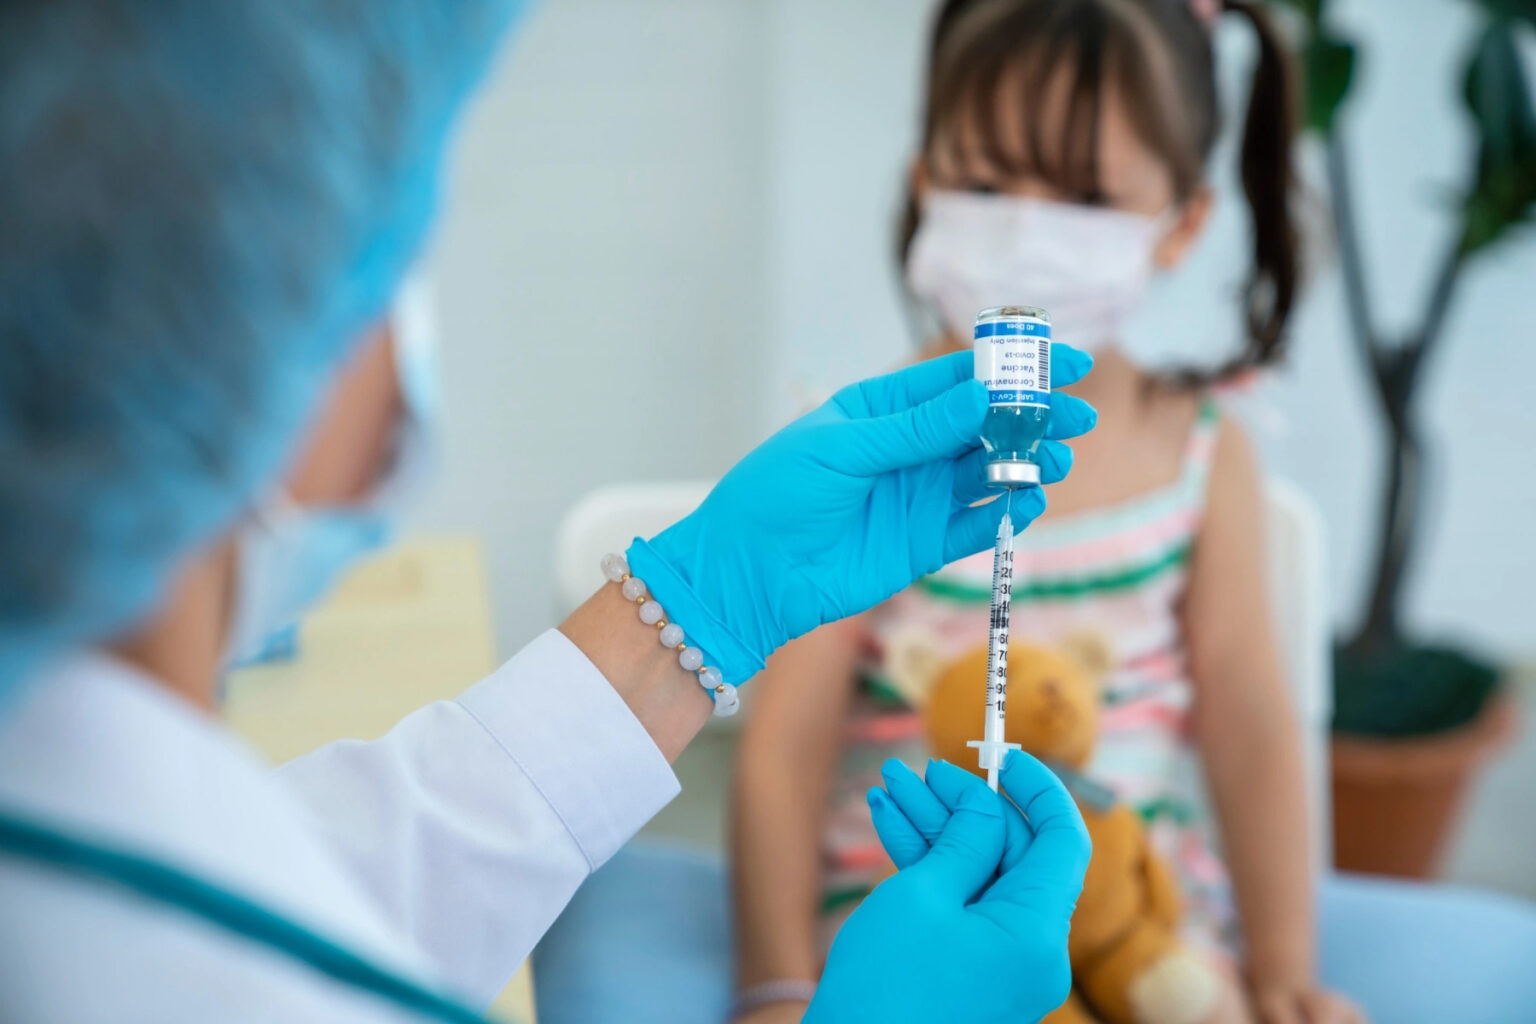 A doctor wearing scrubs prepared a vaccination in front of a young girl wearing colorful clothing and a face mask